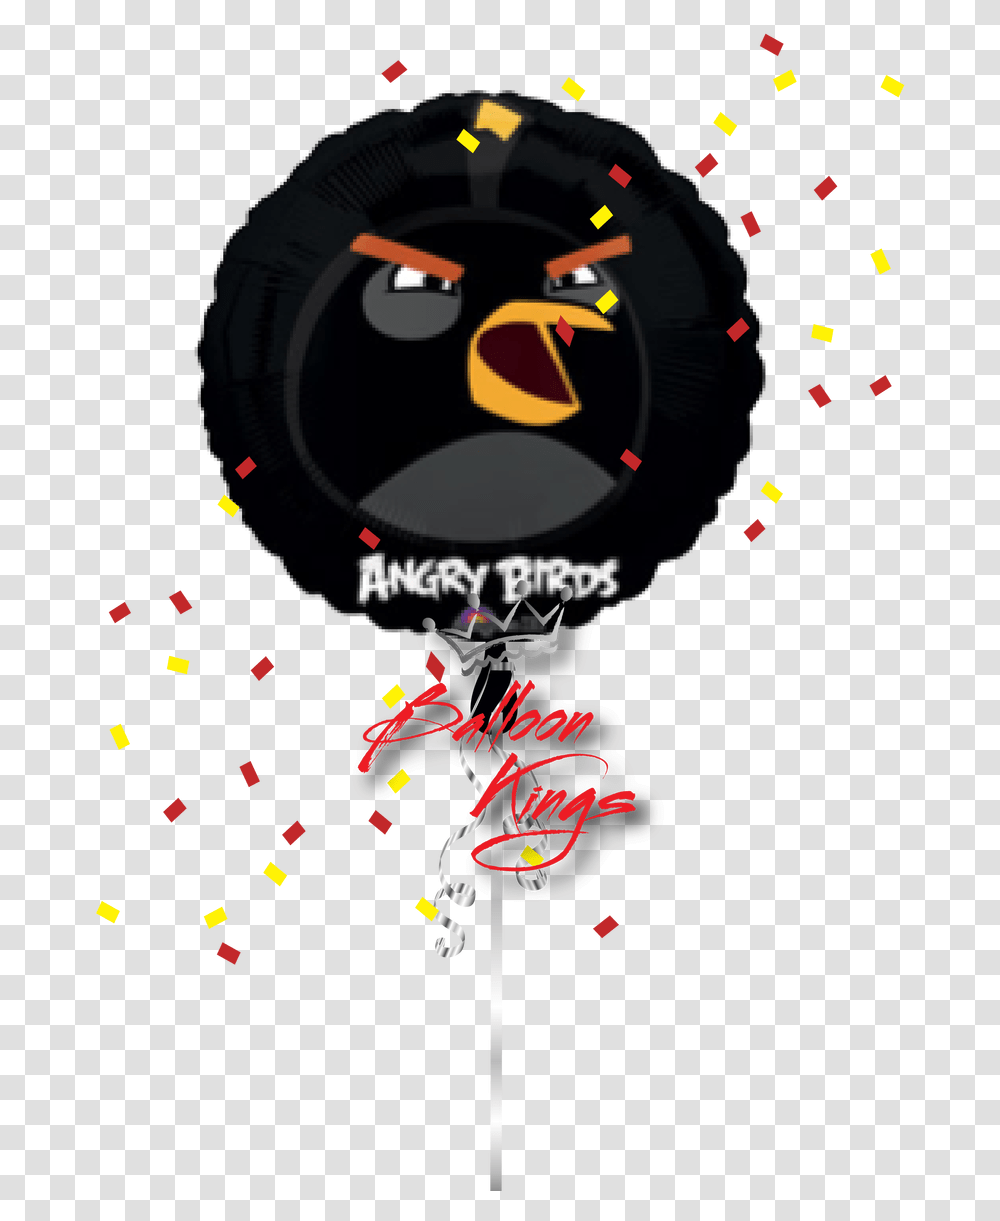 Angry Birds Black 45cm Angry Birds Black Bird Full Size Angry Birds Space, Helmet, Clothing, Apparel, Paper Transparent Png